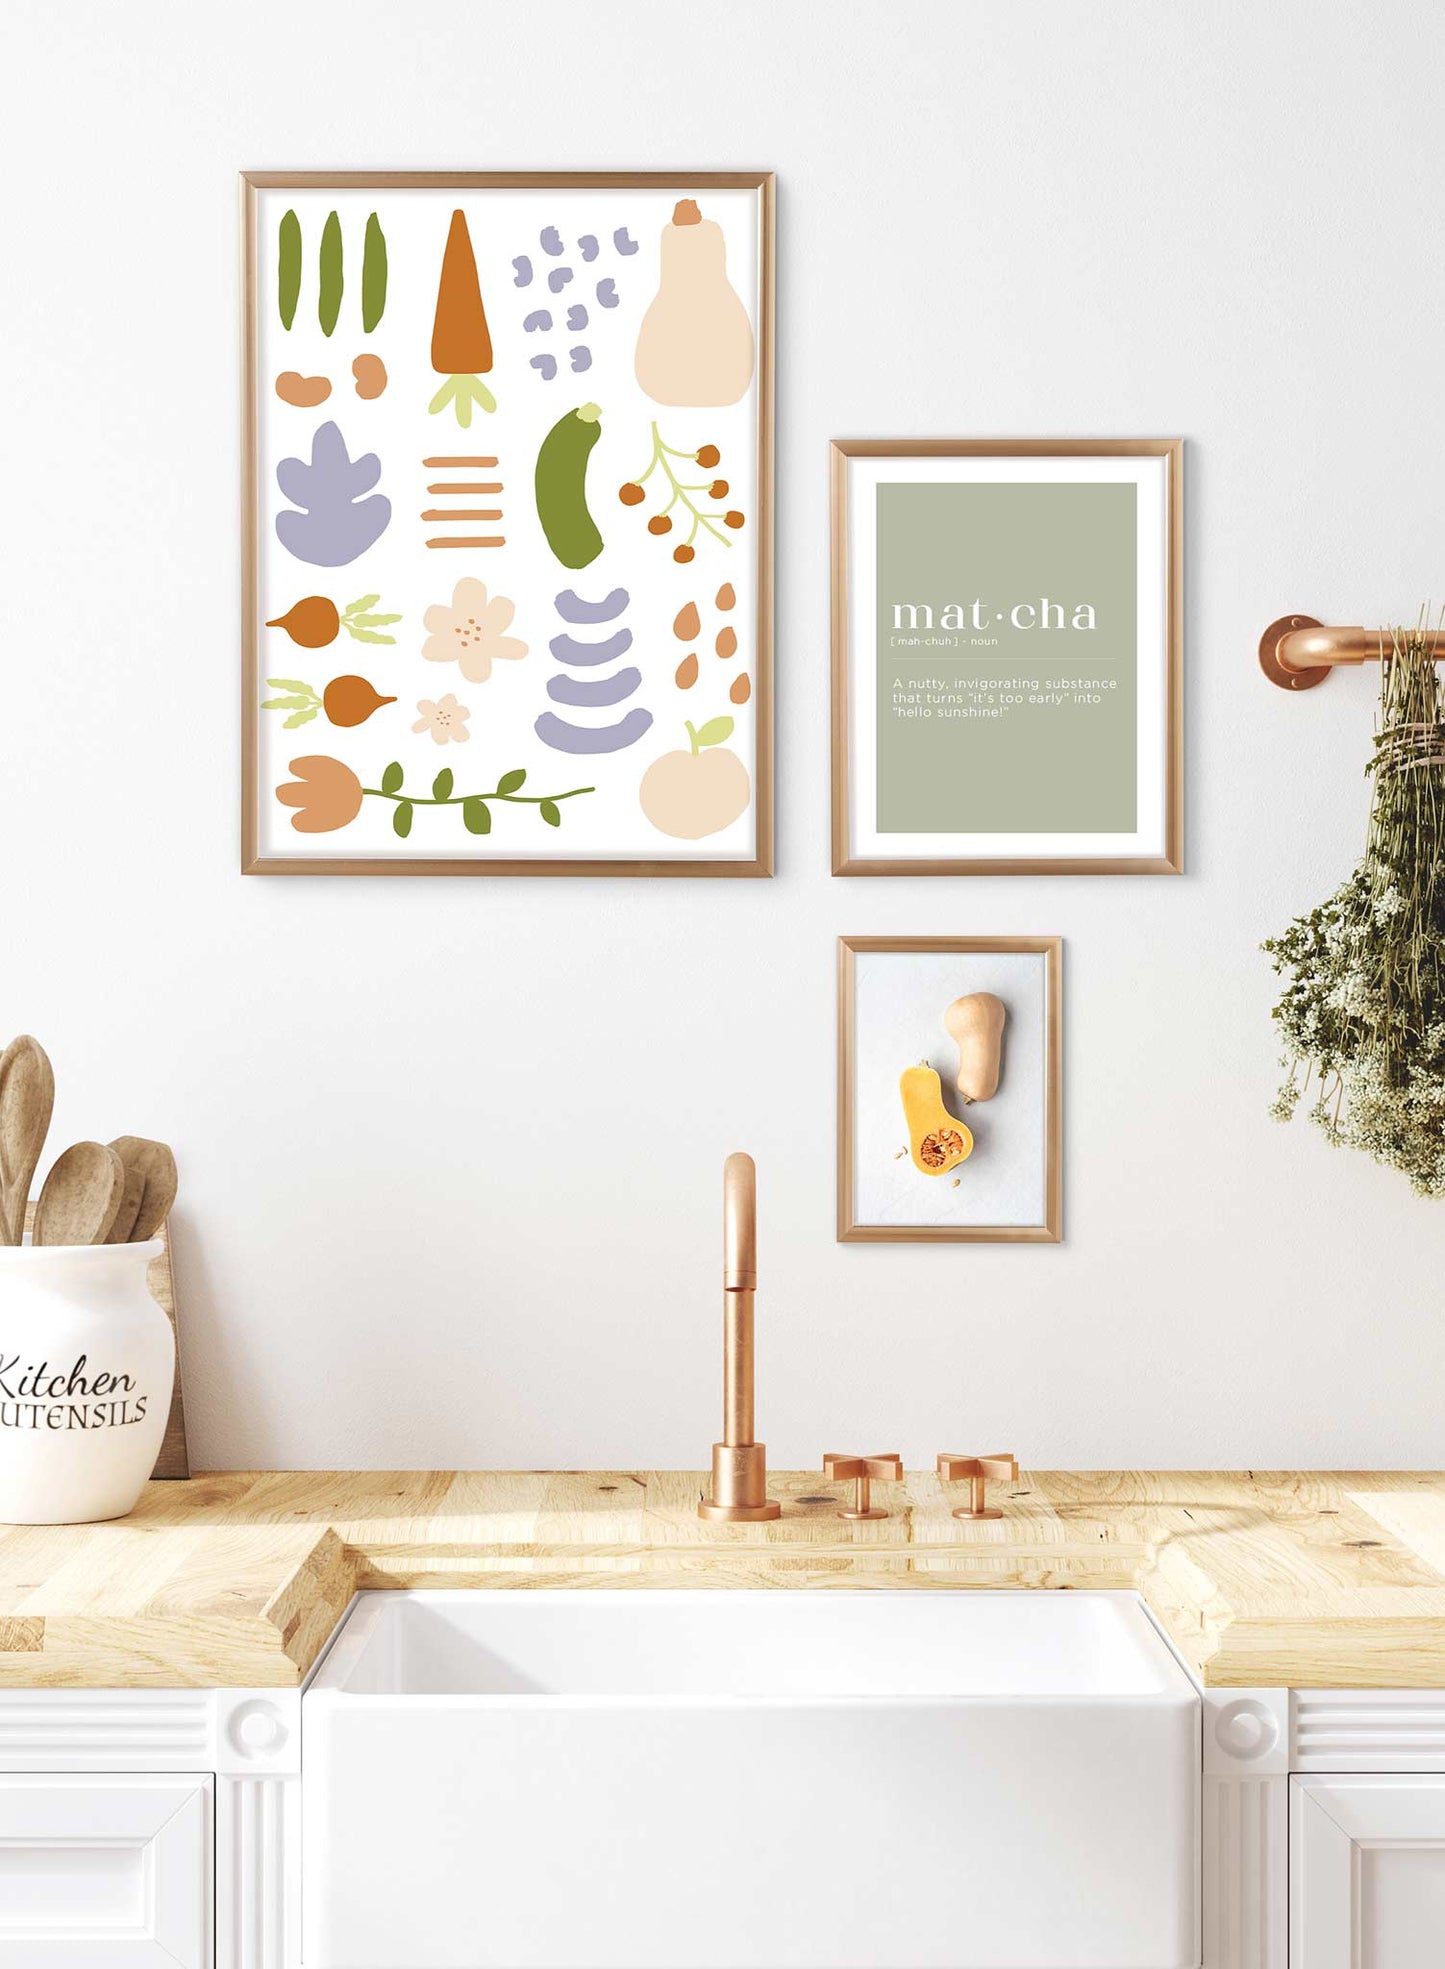 Deconstructed Garden is a fruit and veggie illustration poster by Opposite Wall.